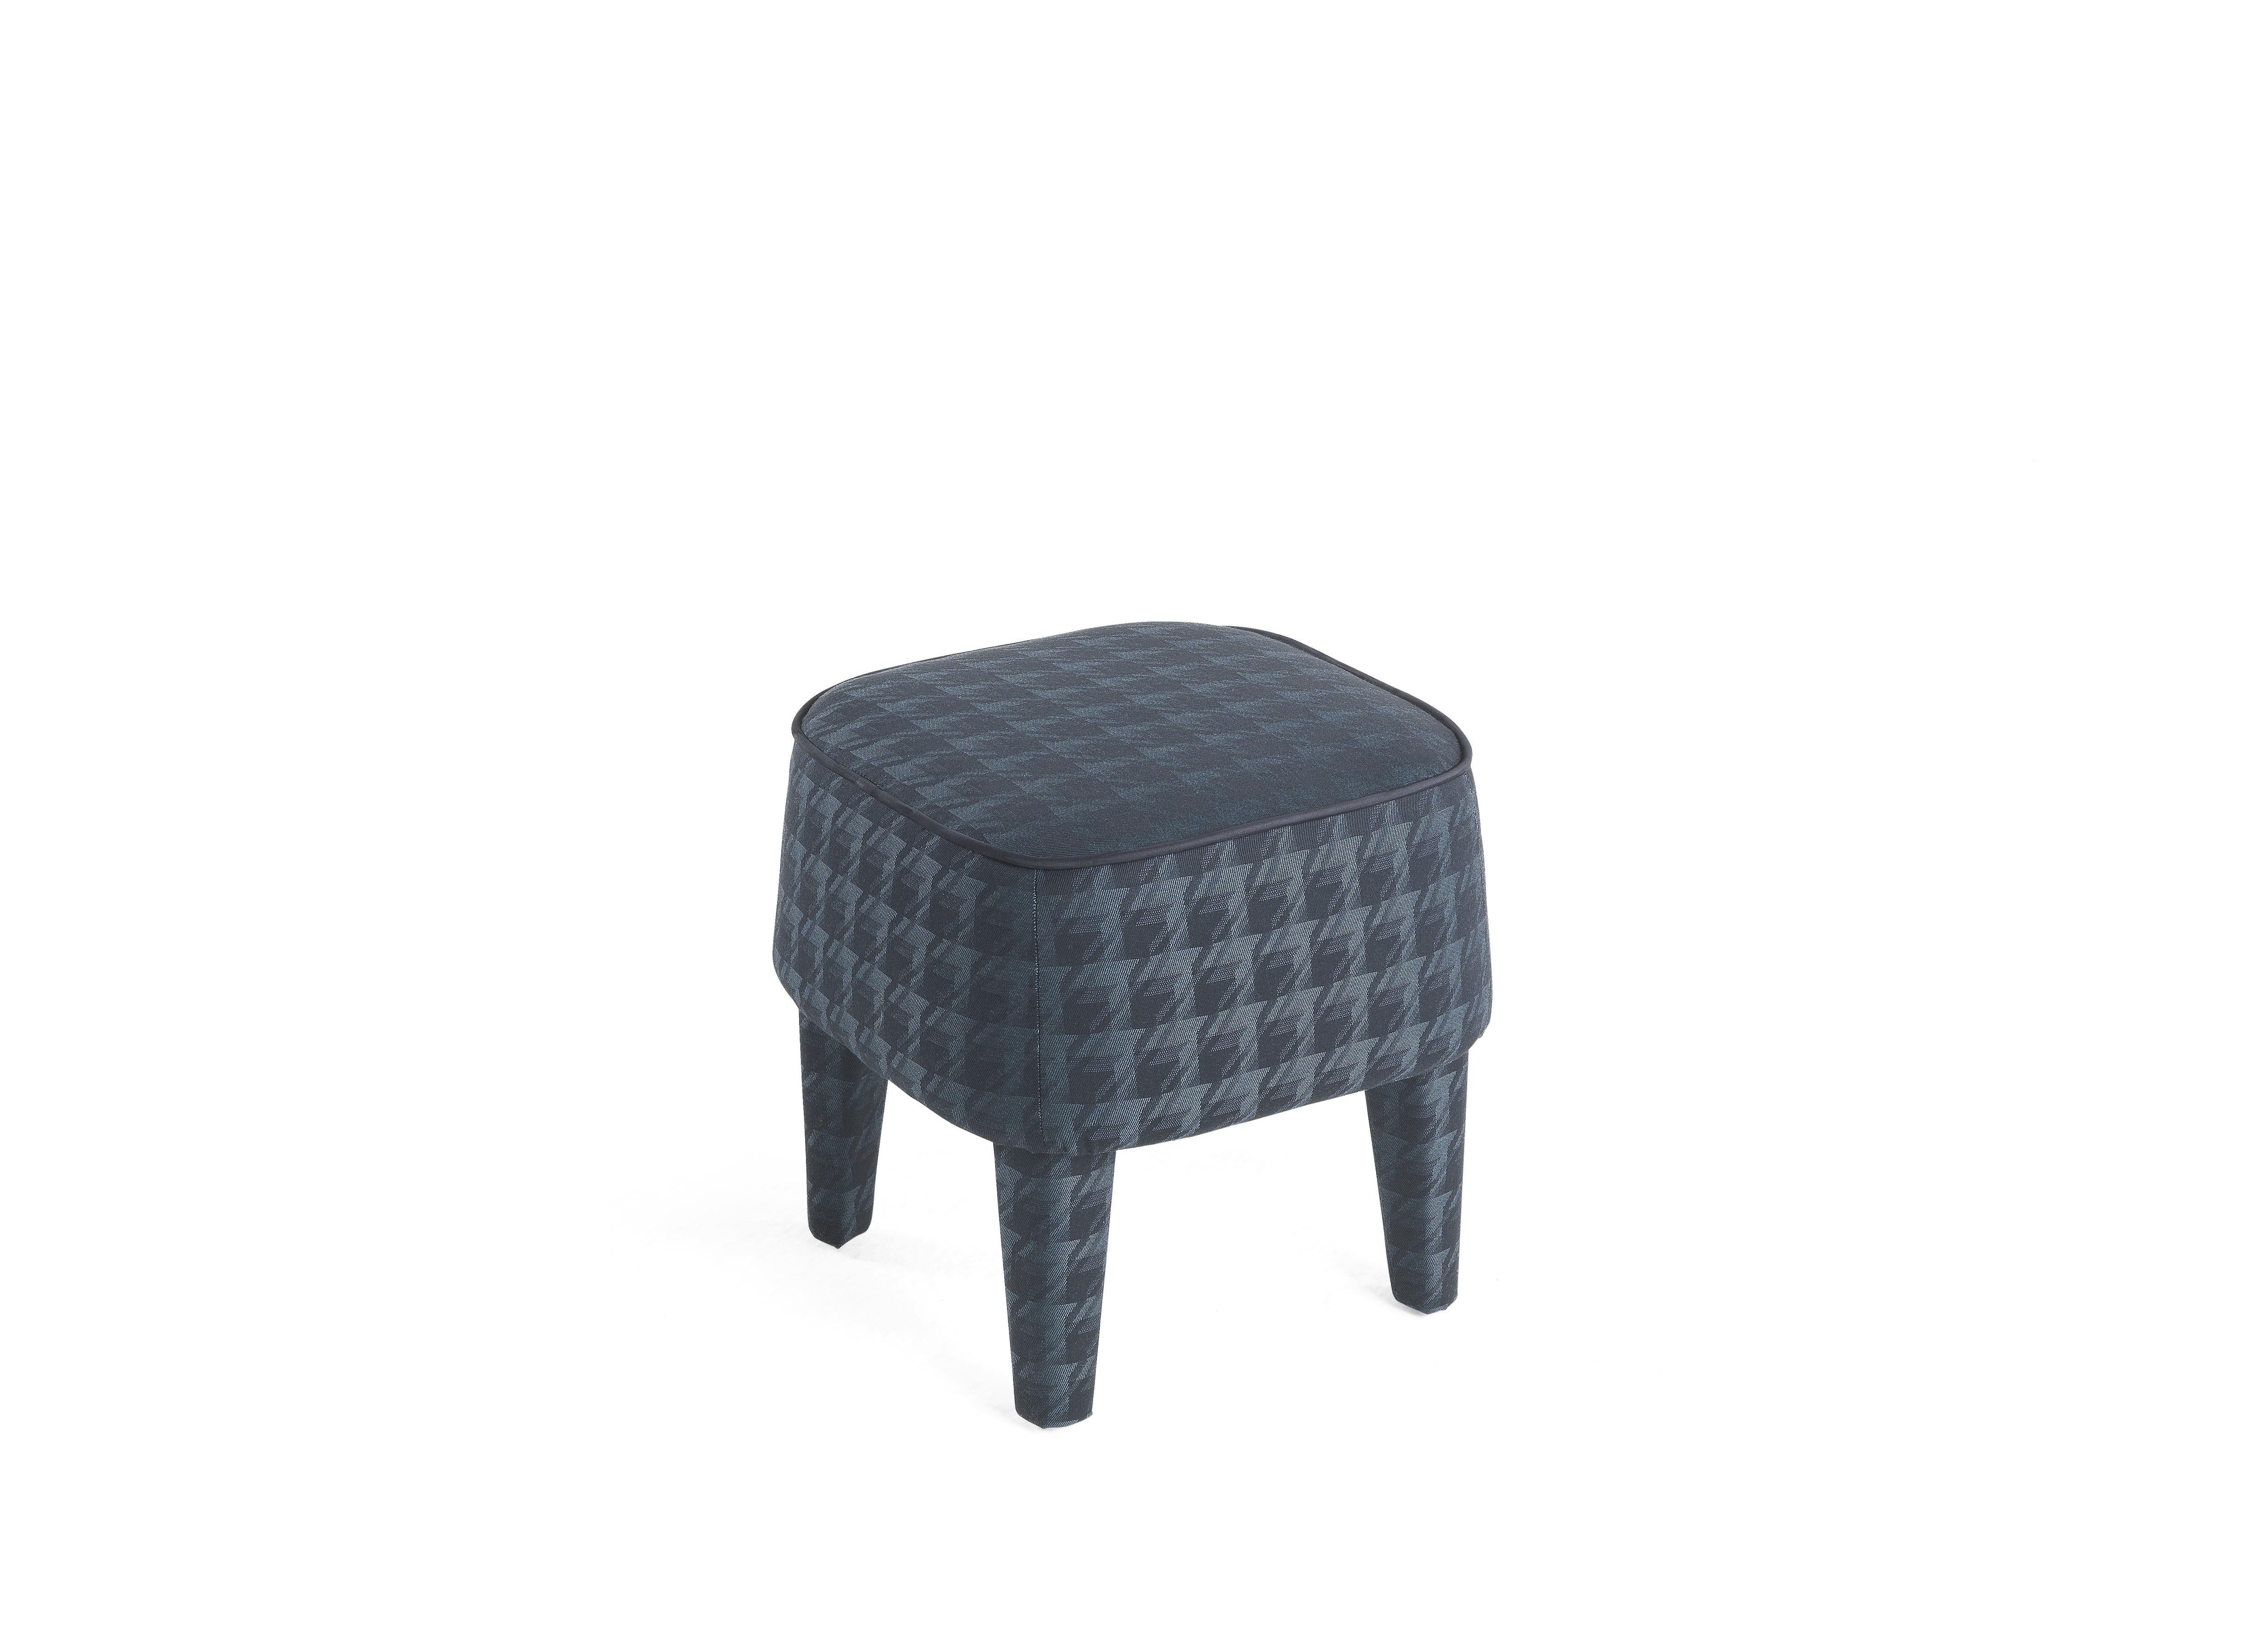 The Mini pouf features a light and versatile design. Small, soft and compact, it adds character to any setting. Available in different menswear fabrics of the collection: pied-de-poule, pinstripe, twill, Prince of Wales.
Mini pouf with structure in